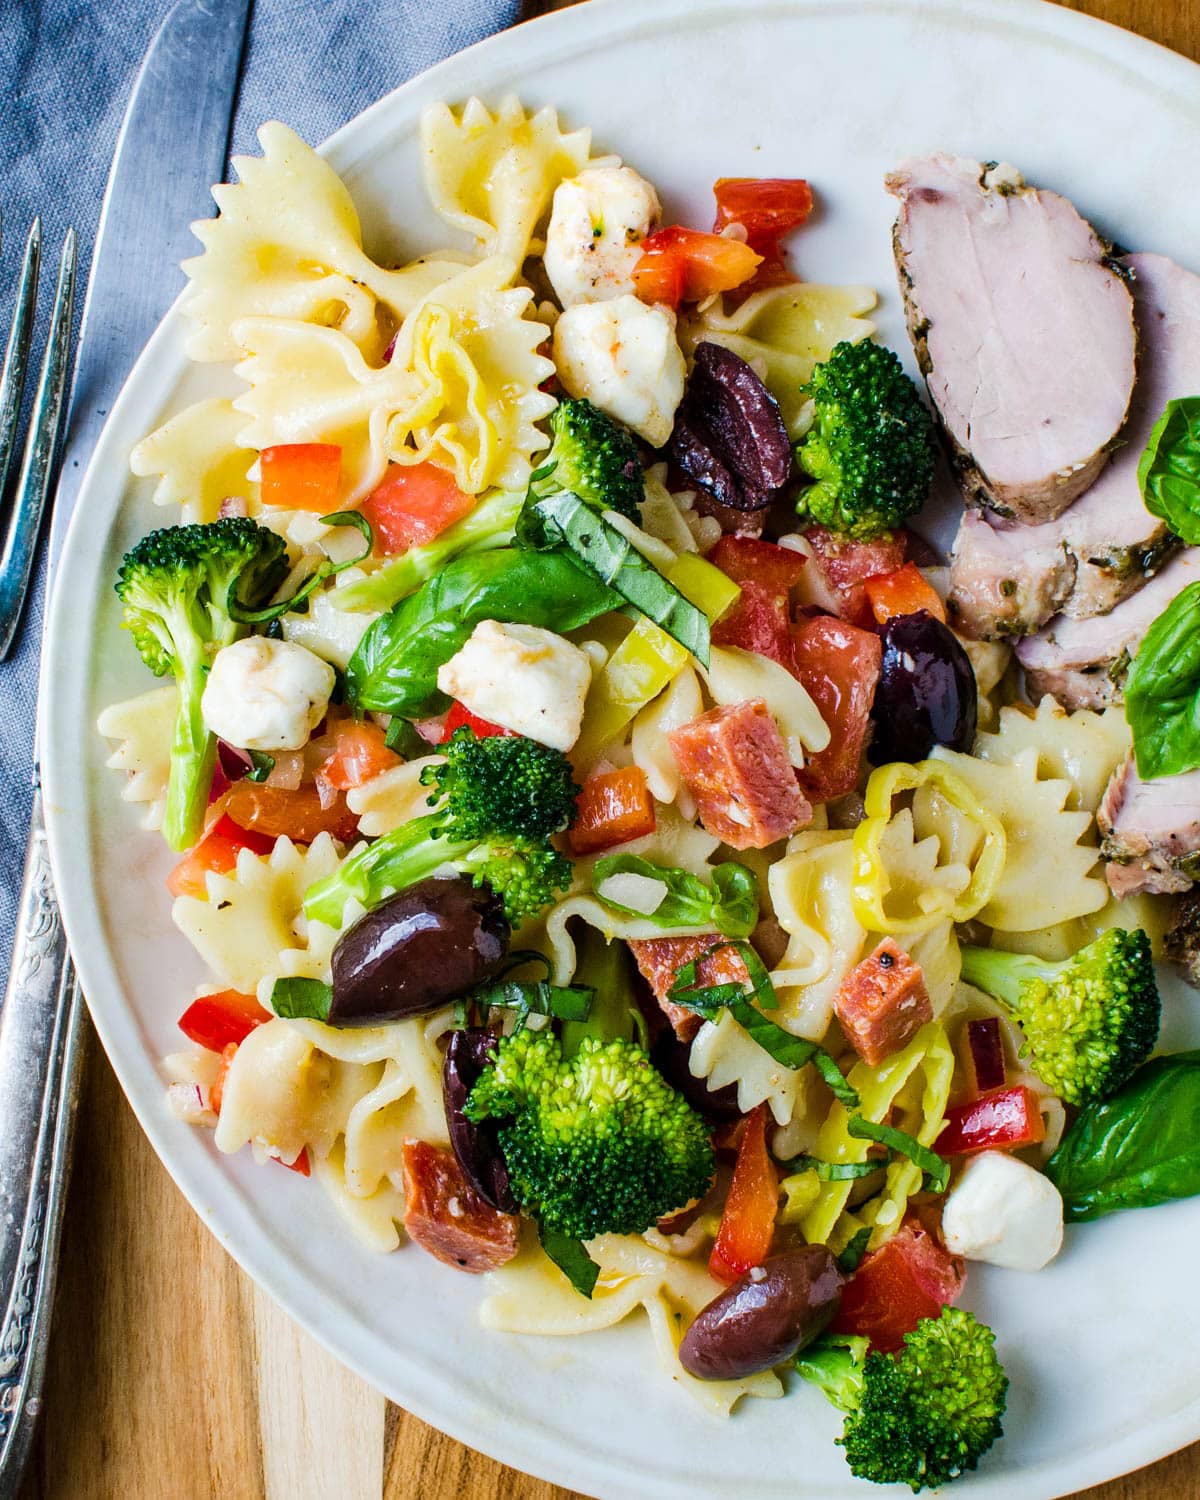 Serving the pasta salad on a plate with sliced chicken.